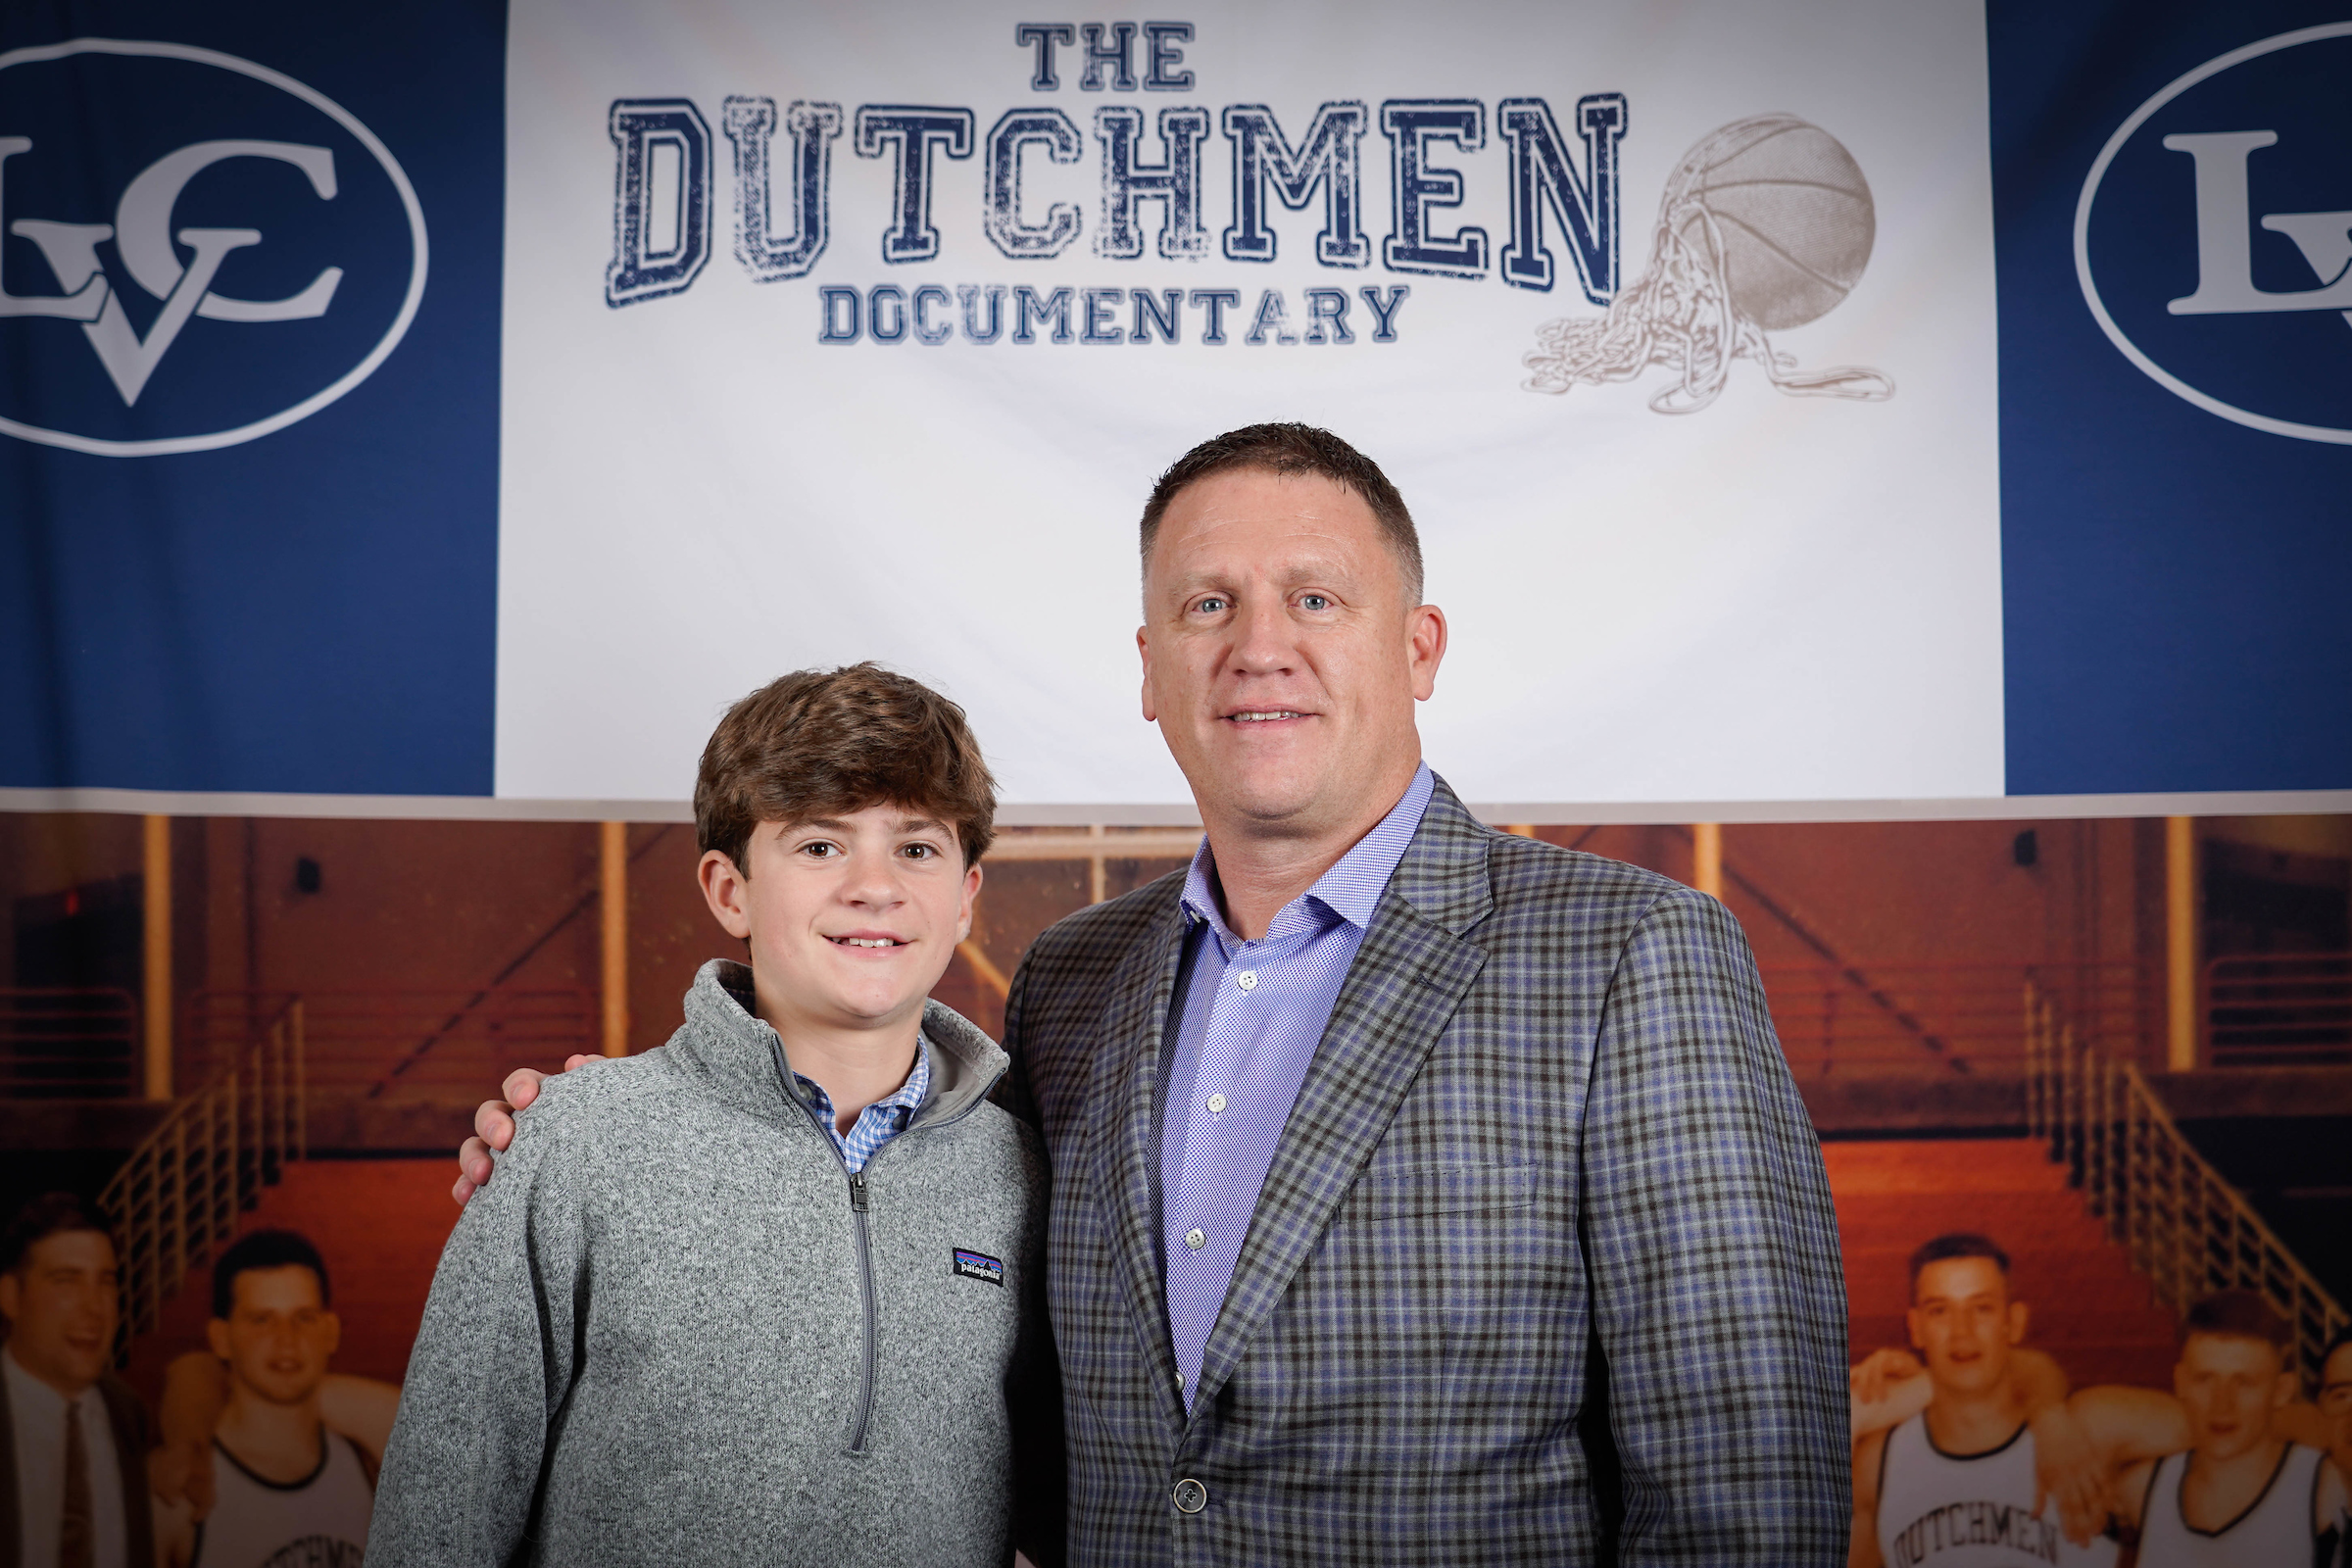 Mike Rhoades at The Dutchmen documentary premier event